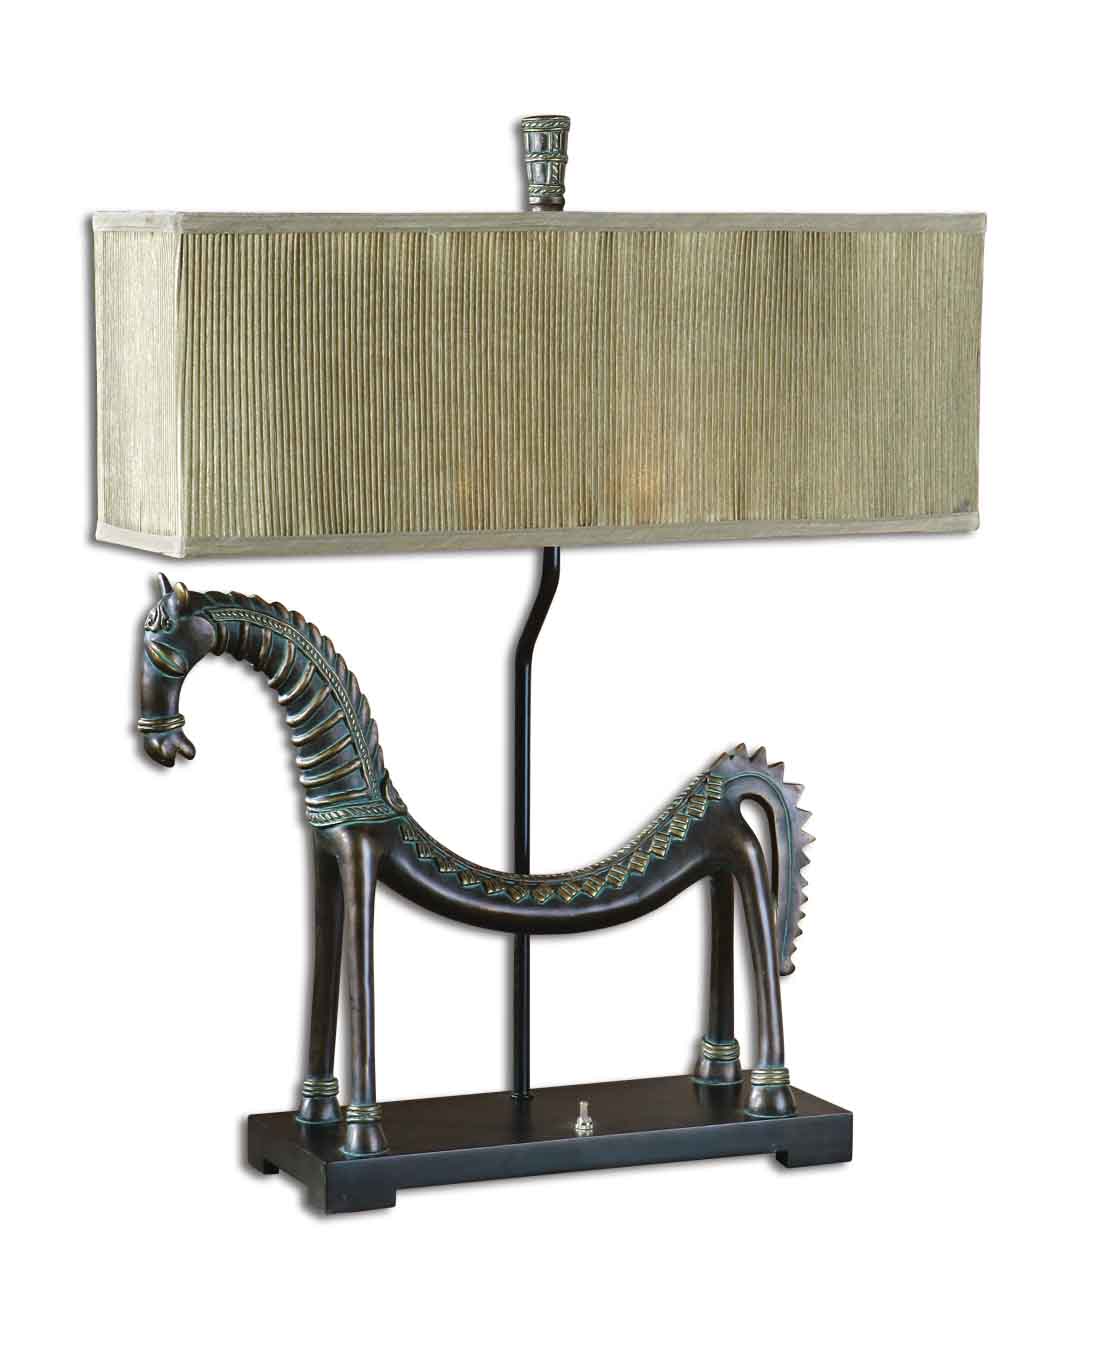 Uttermost 27907-1 Tamil Horse Table Lamp